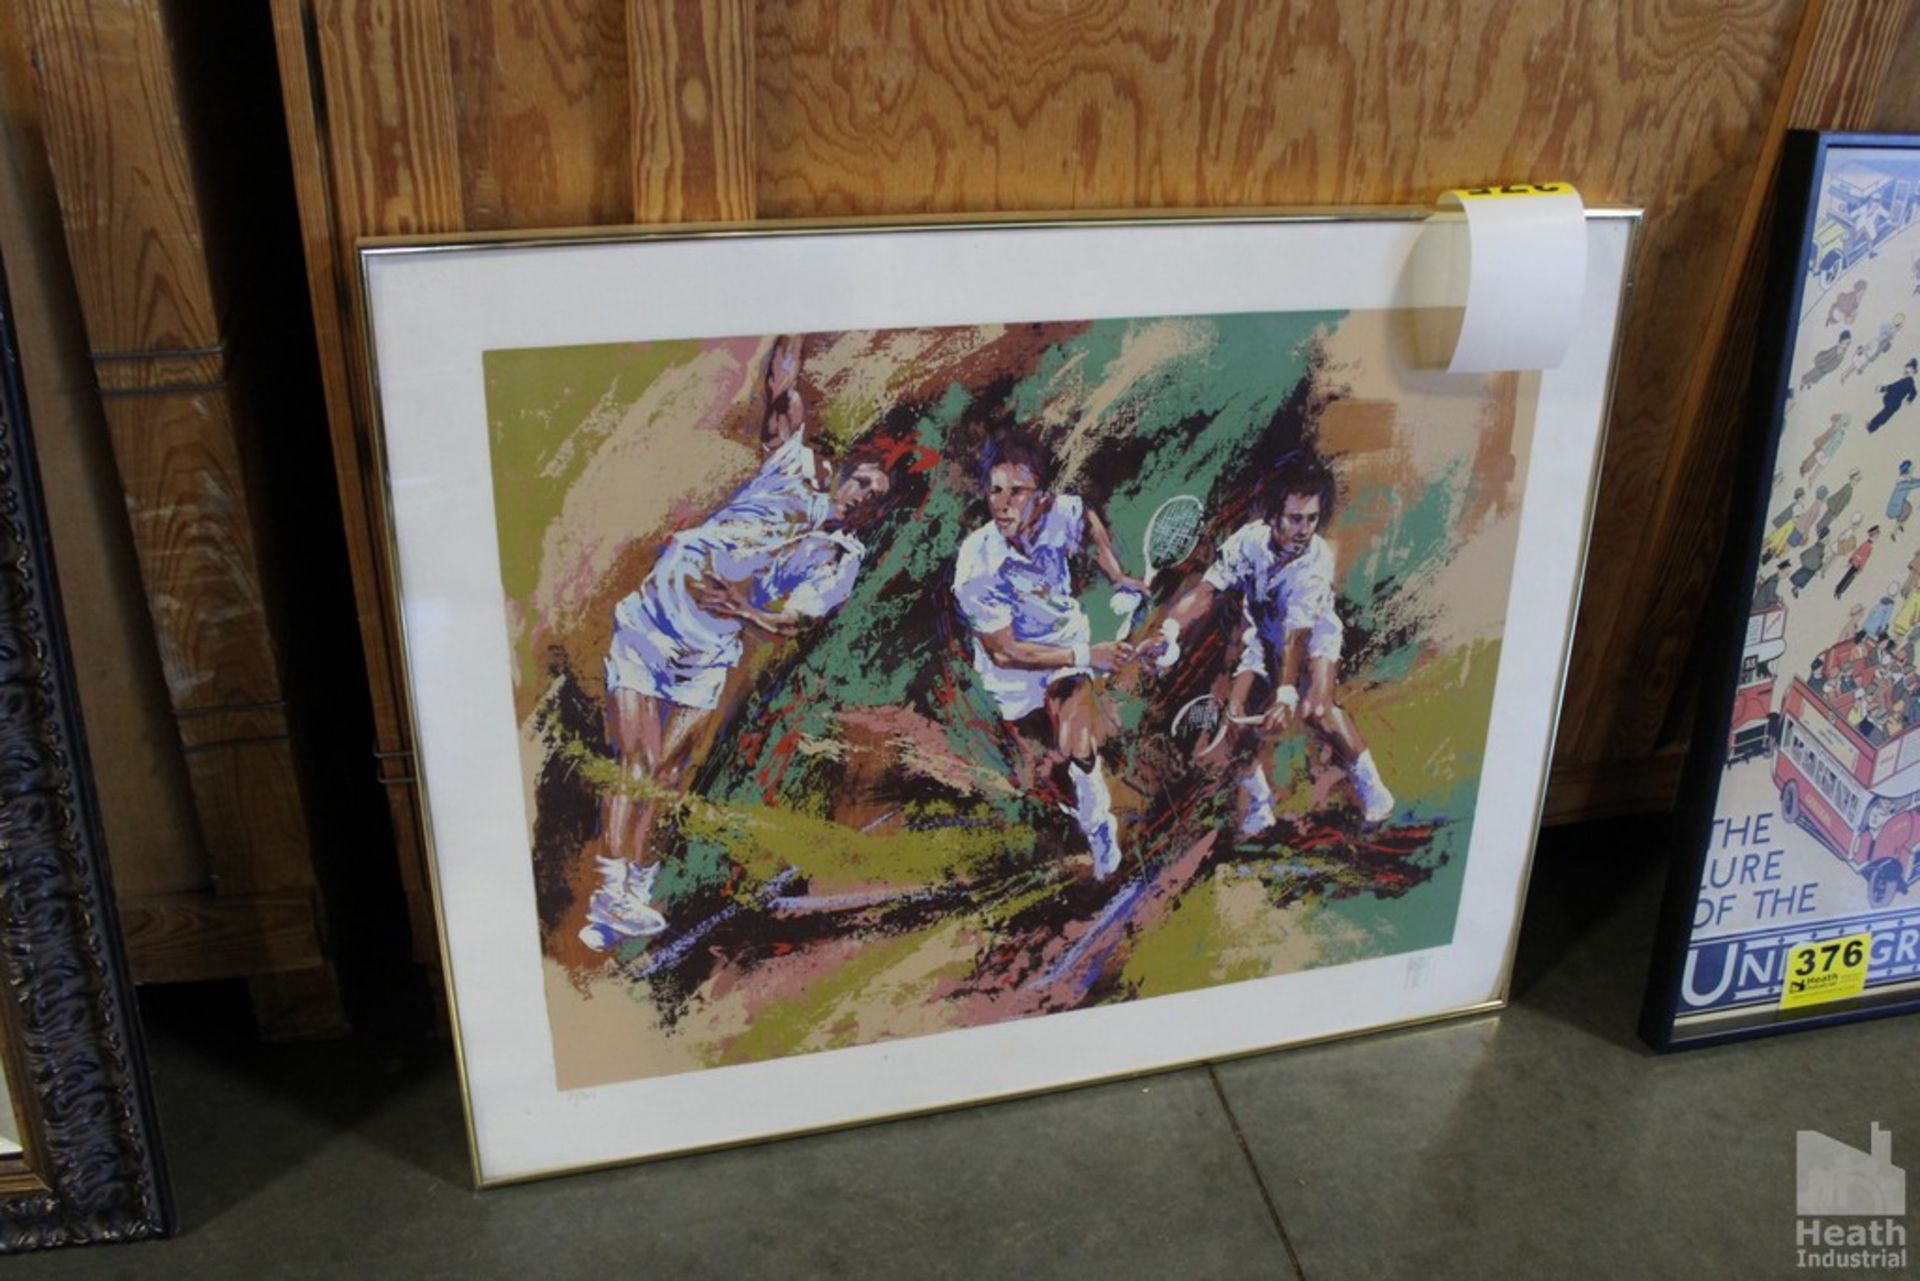 FRAMED PAINTING OF TENNIS PLAYER, MAYBE IT IS MCENROE, 41" X 32"